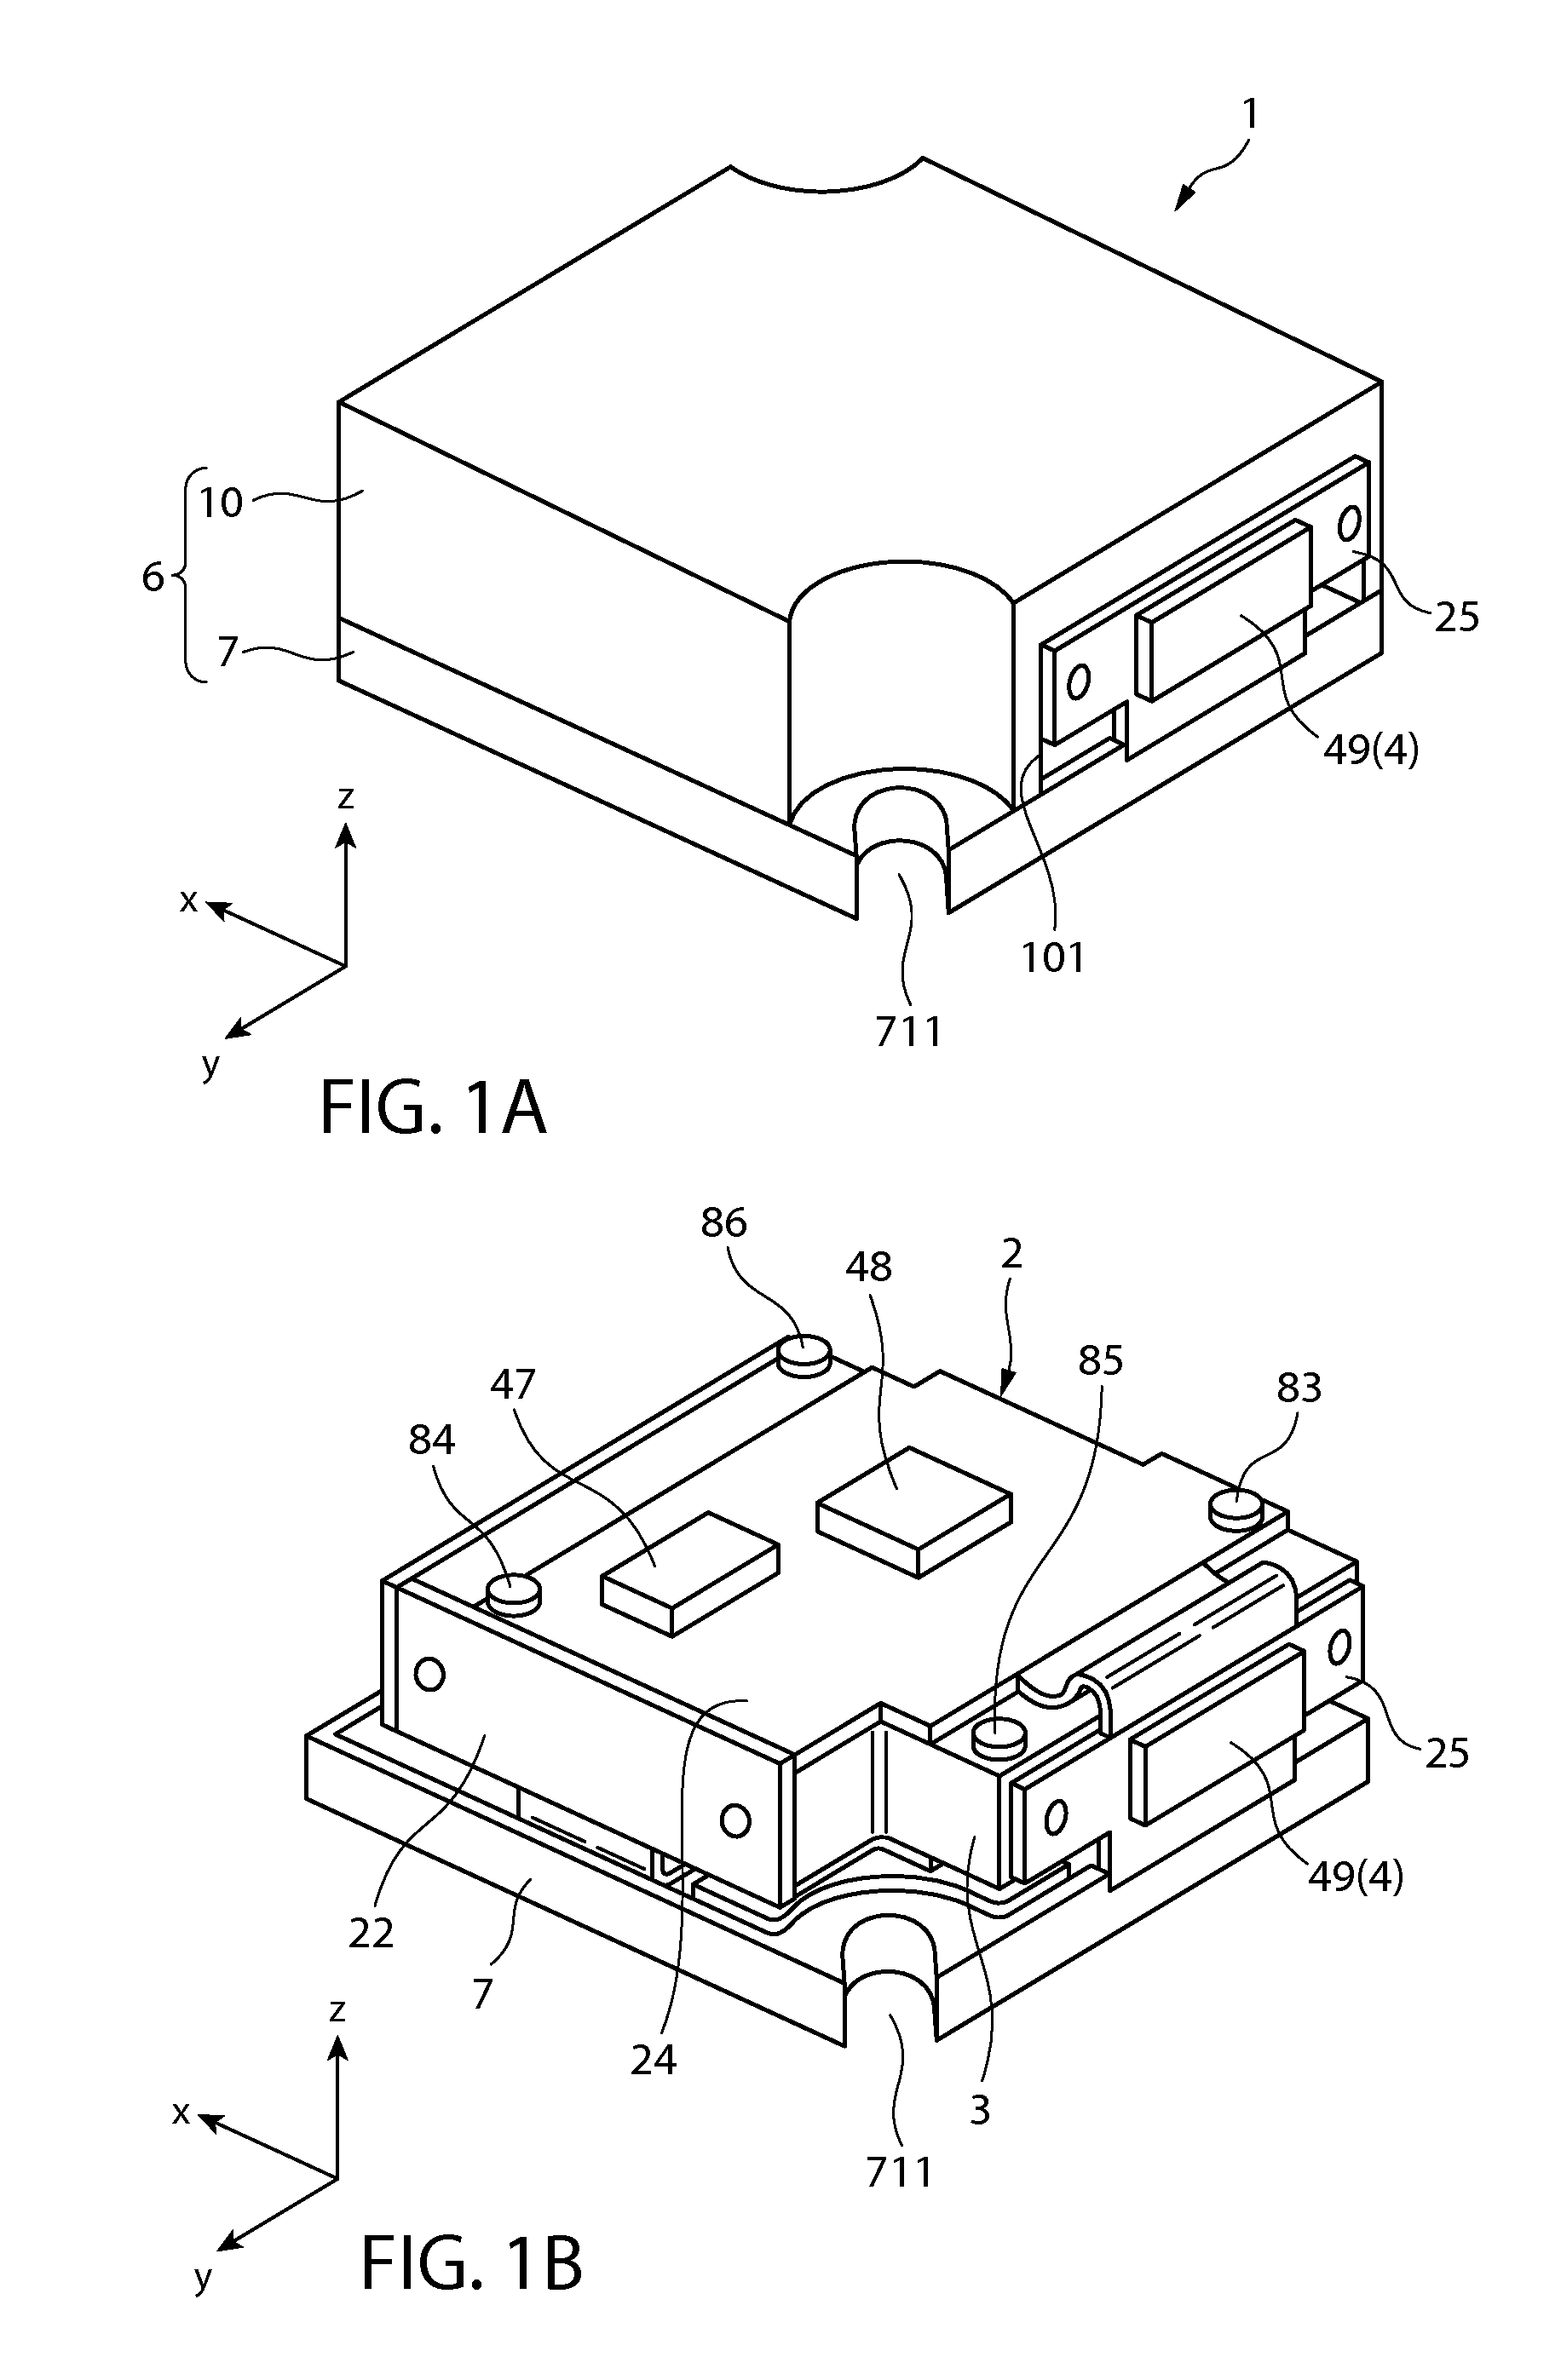 Maintaining member, module, and electronic apparatus